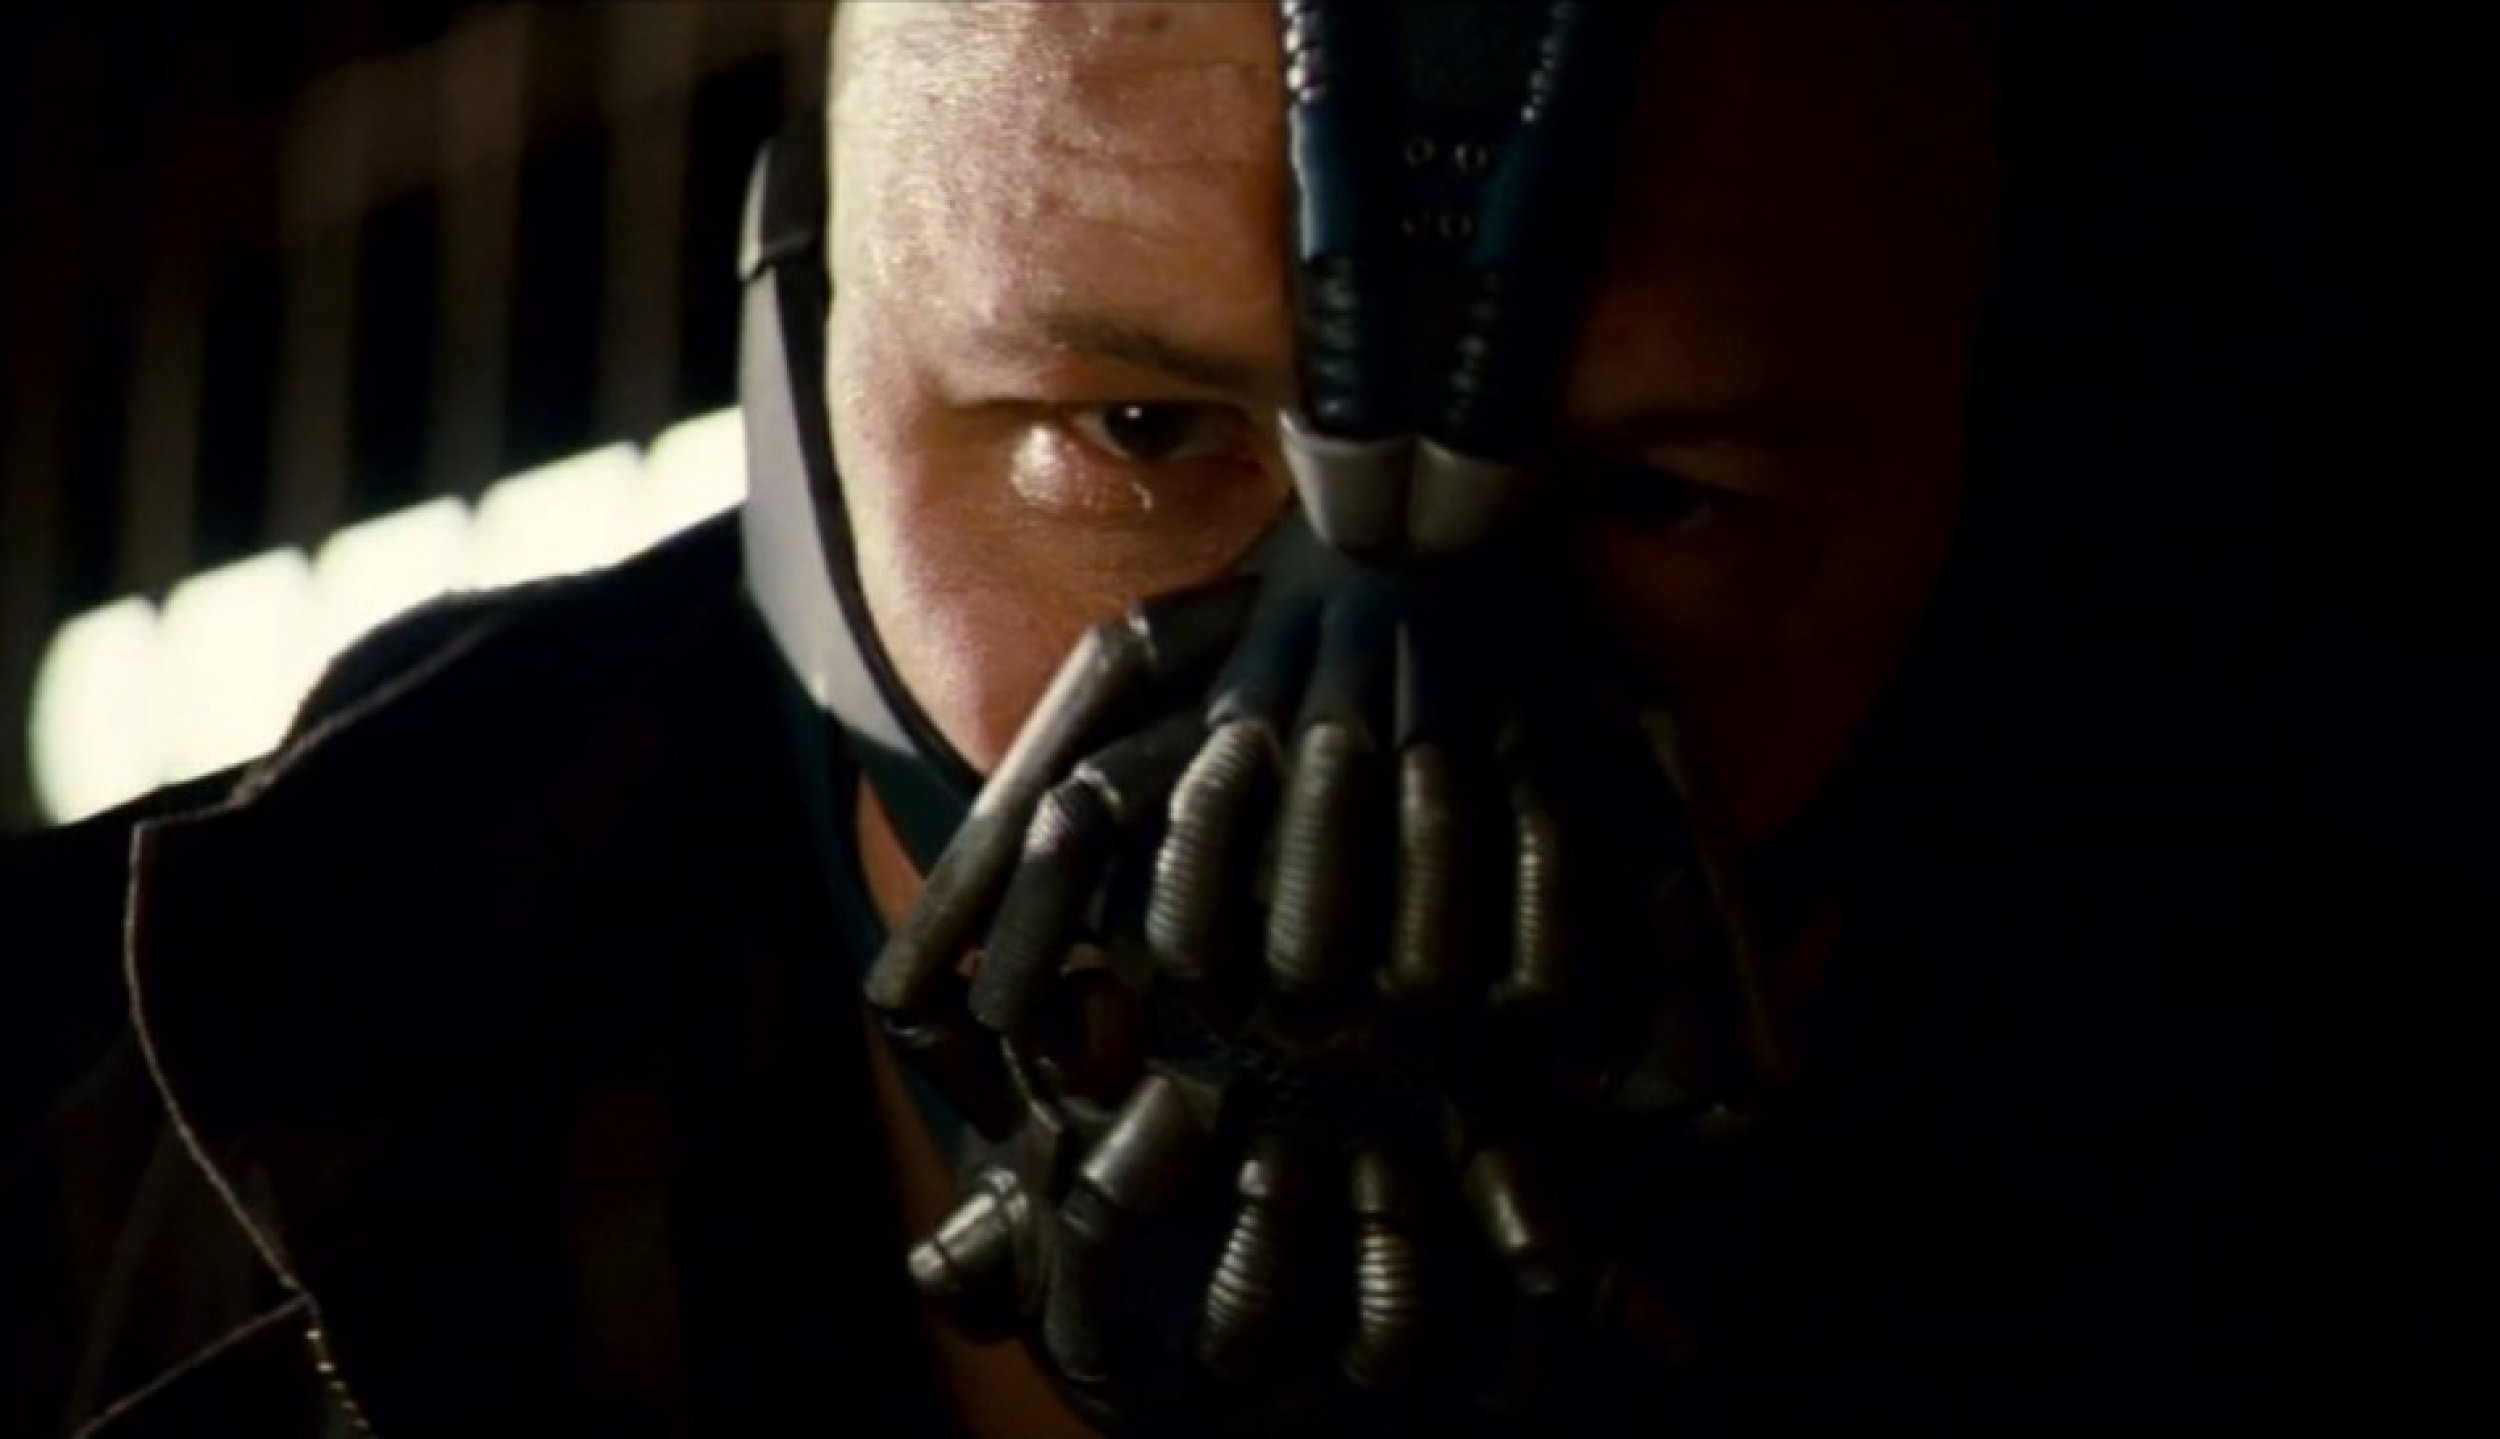 Dark Knight Rises Latest Pictures of Batman, Bane and Others.